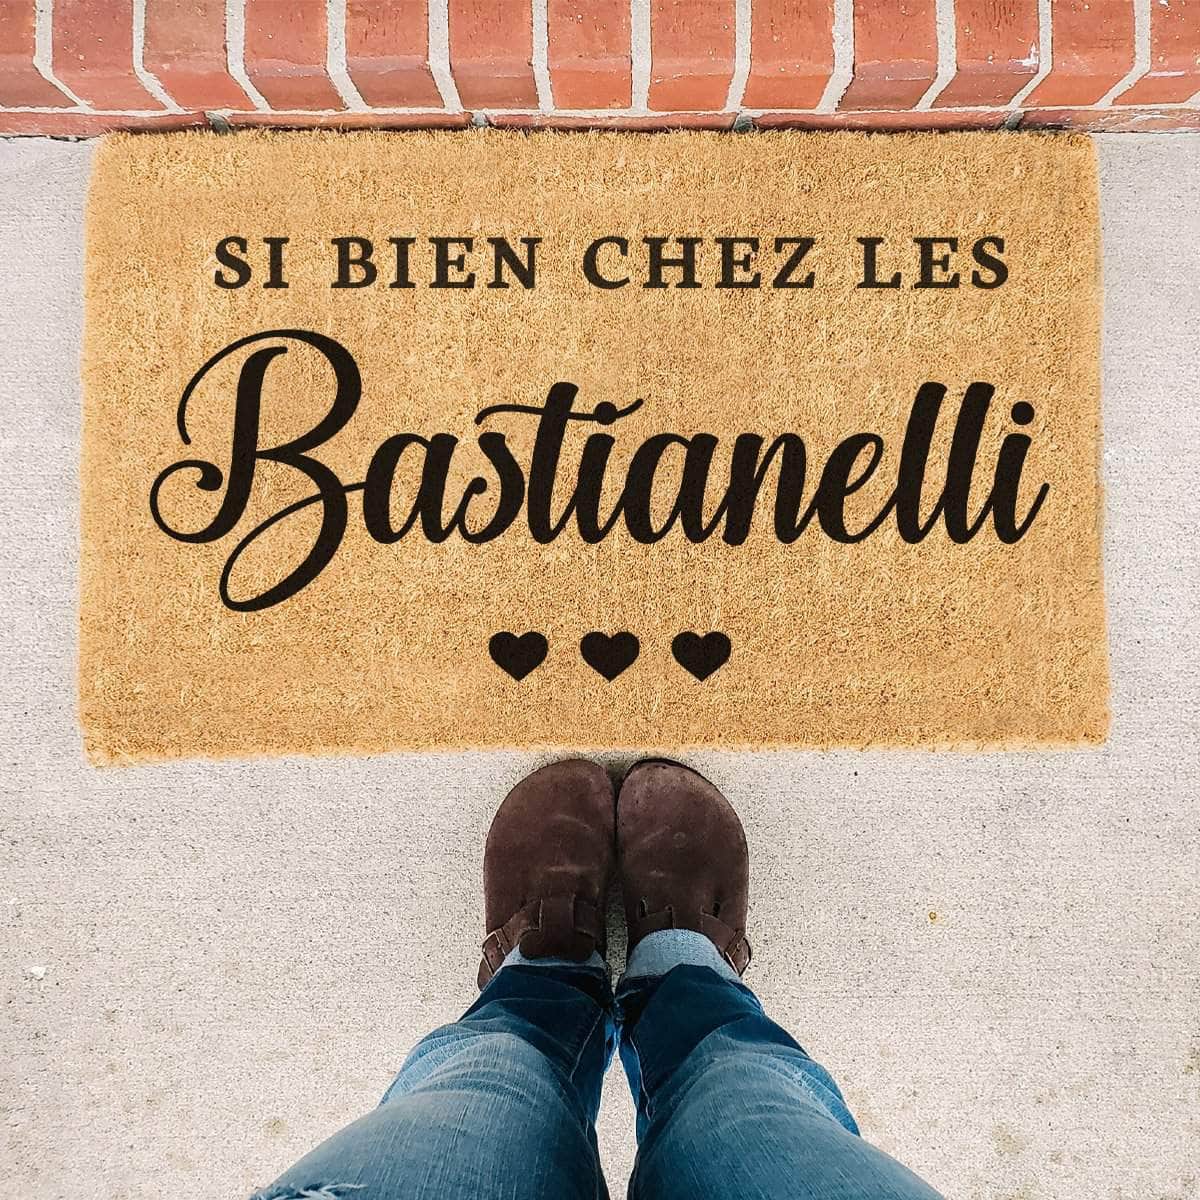 Si Bien Chez Les "There's No Place Like Home" - French Personalized Names Doormat